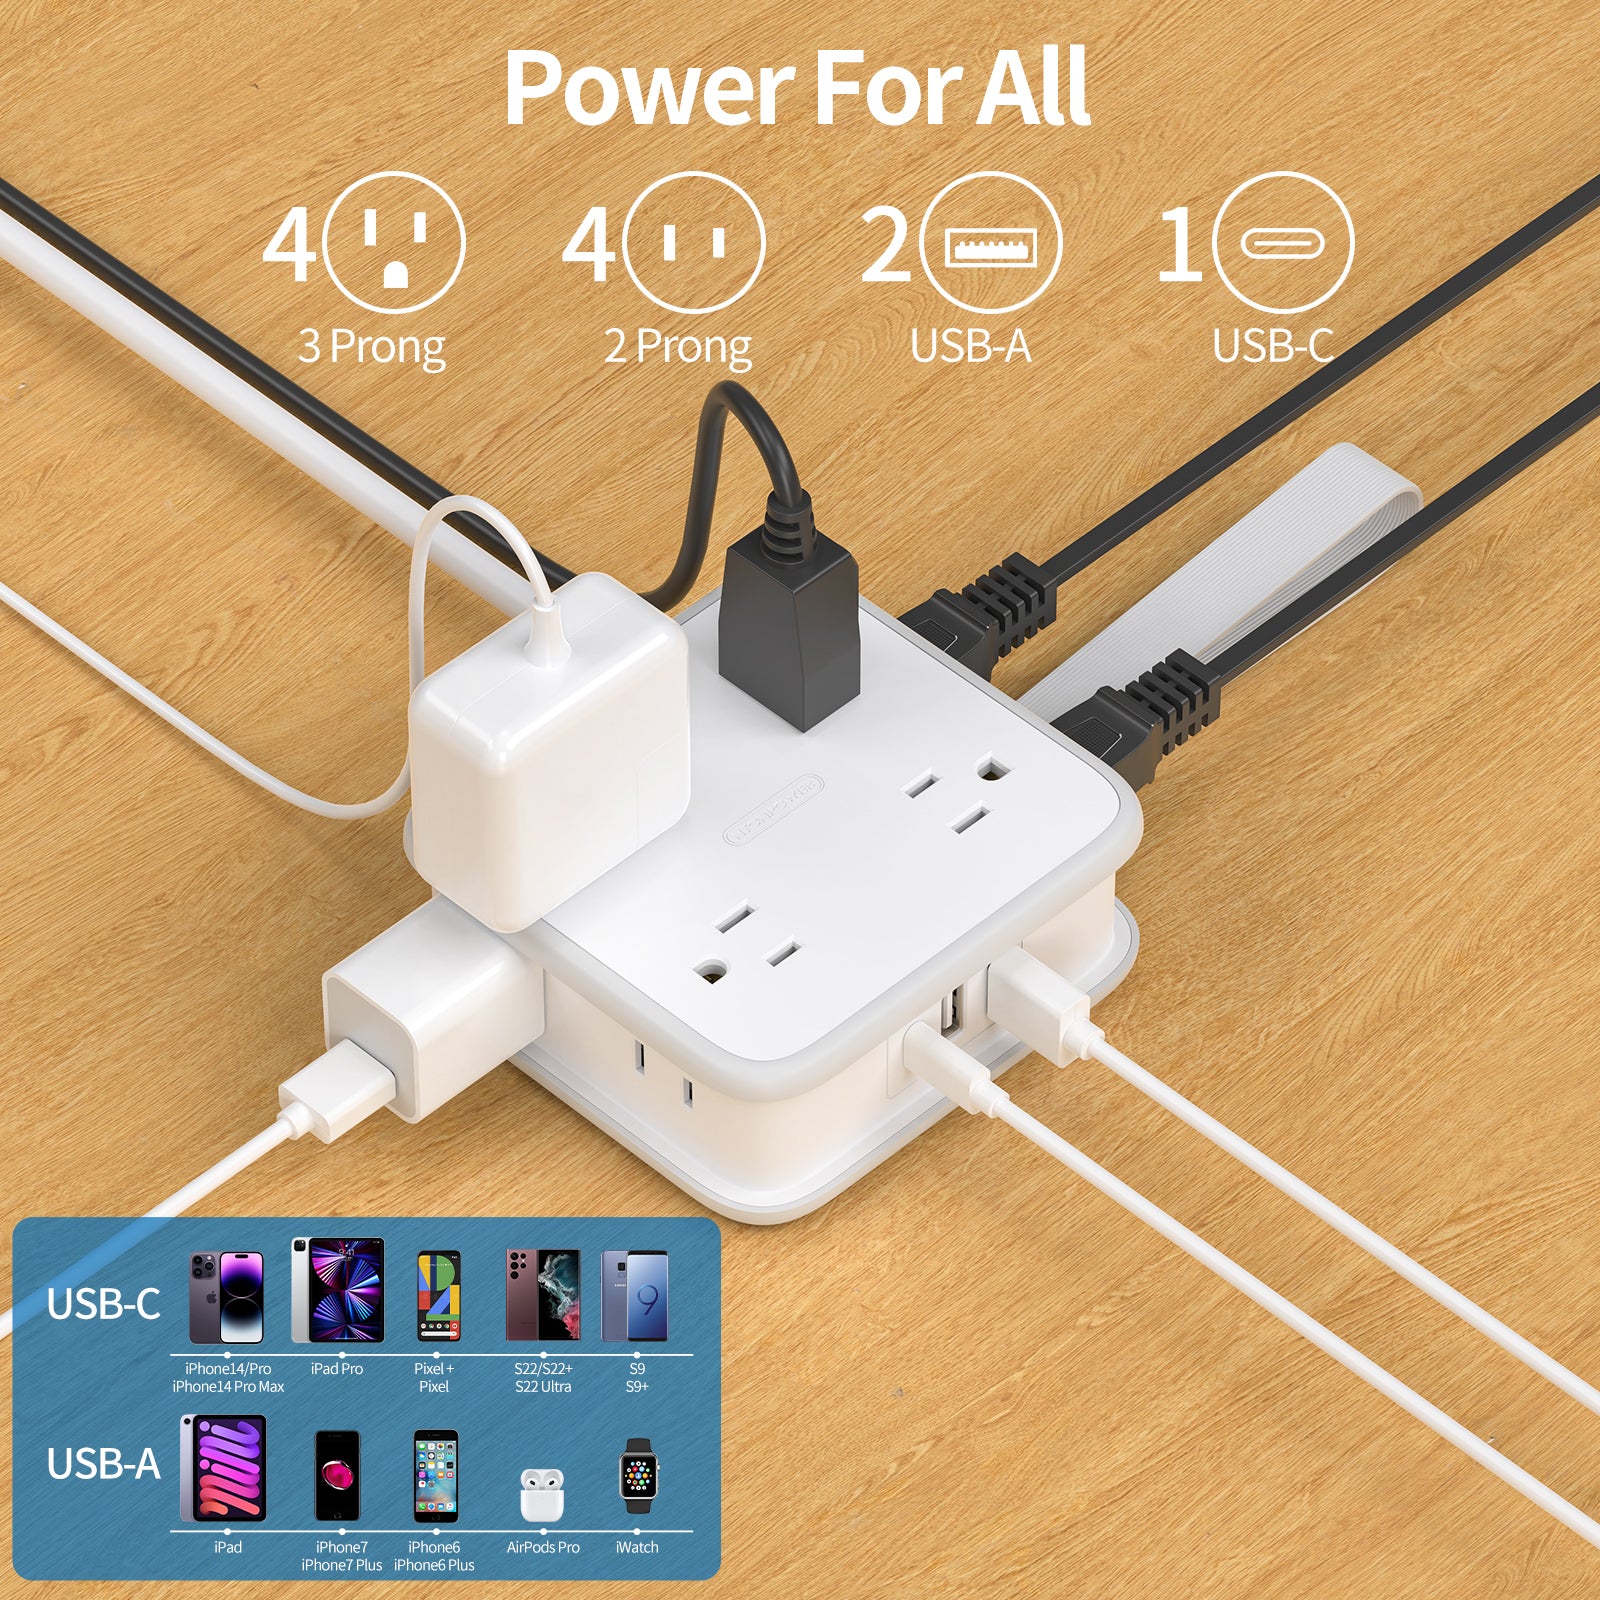 Ntonpower Powercube Power Strip 8 Outlets 3 USB Wrapped Cord